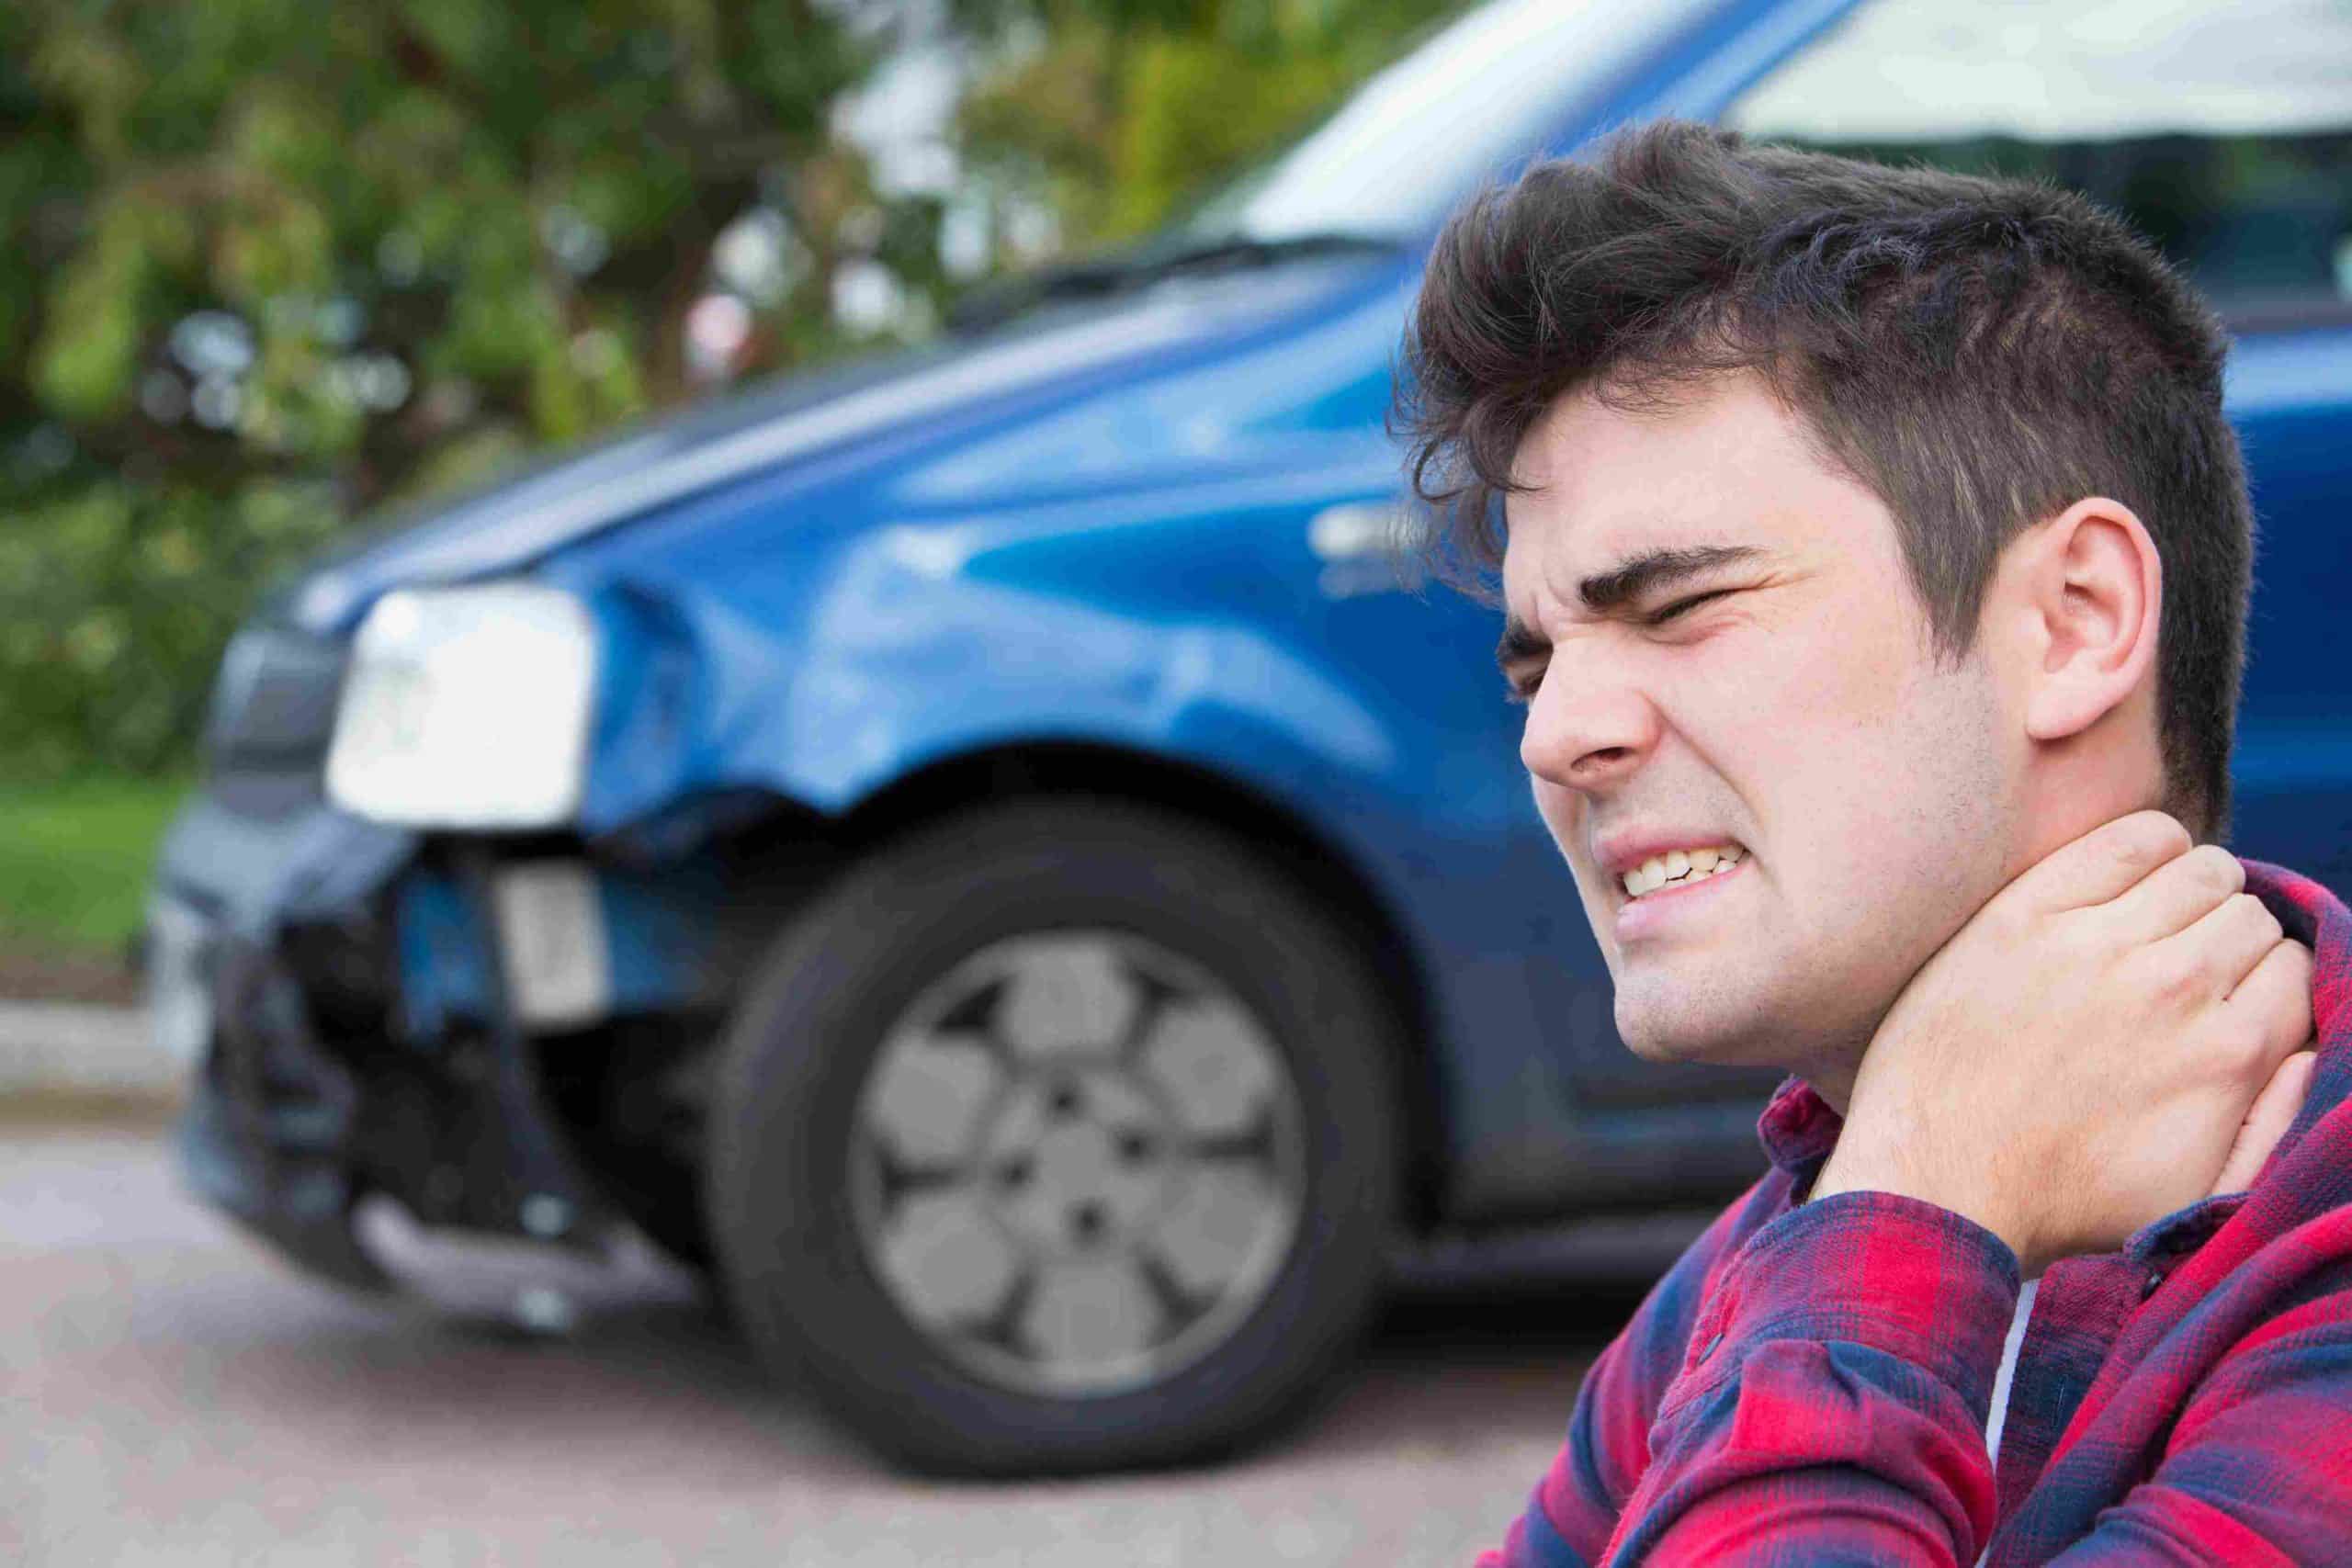 Is It Worth Filing a Claim for Whiplash?